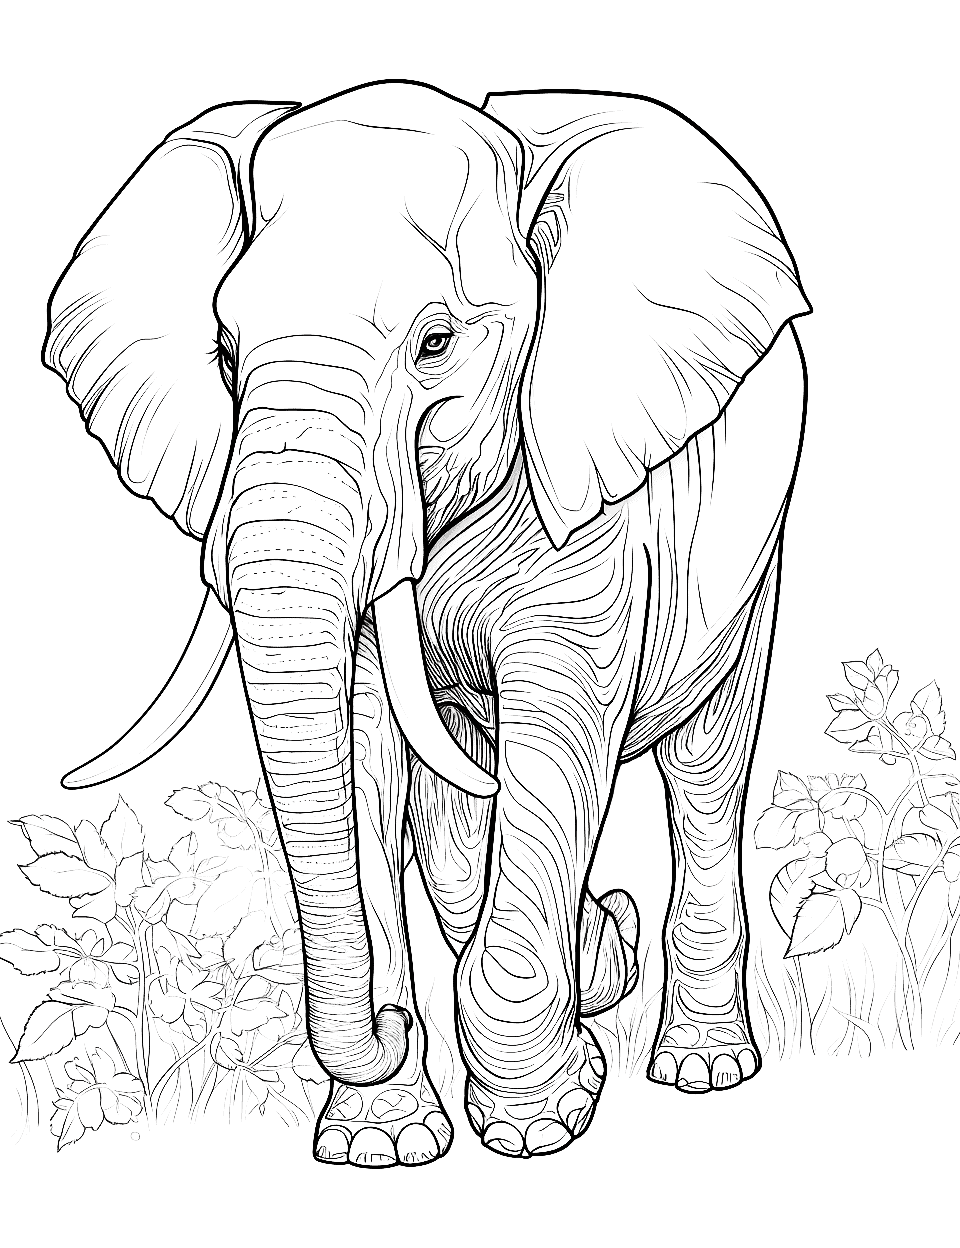 Elephant's Gentle Stroll Adult Coloring Page - An elephant with its trunk swaying gracefully.